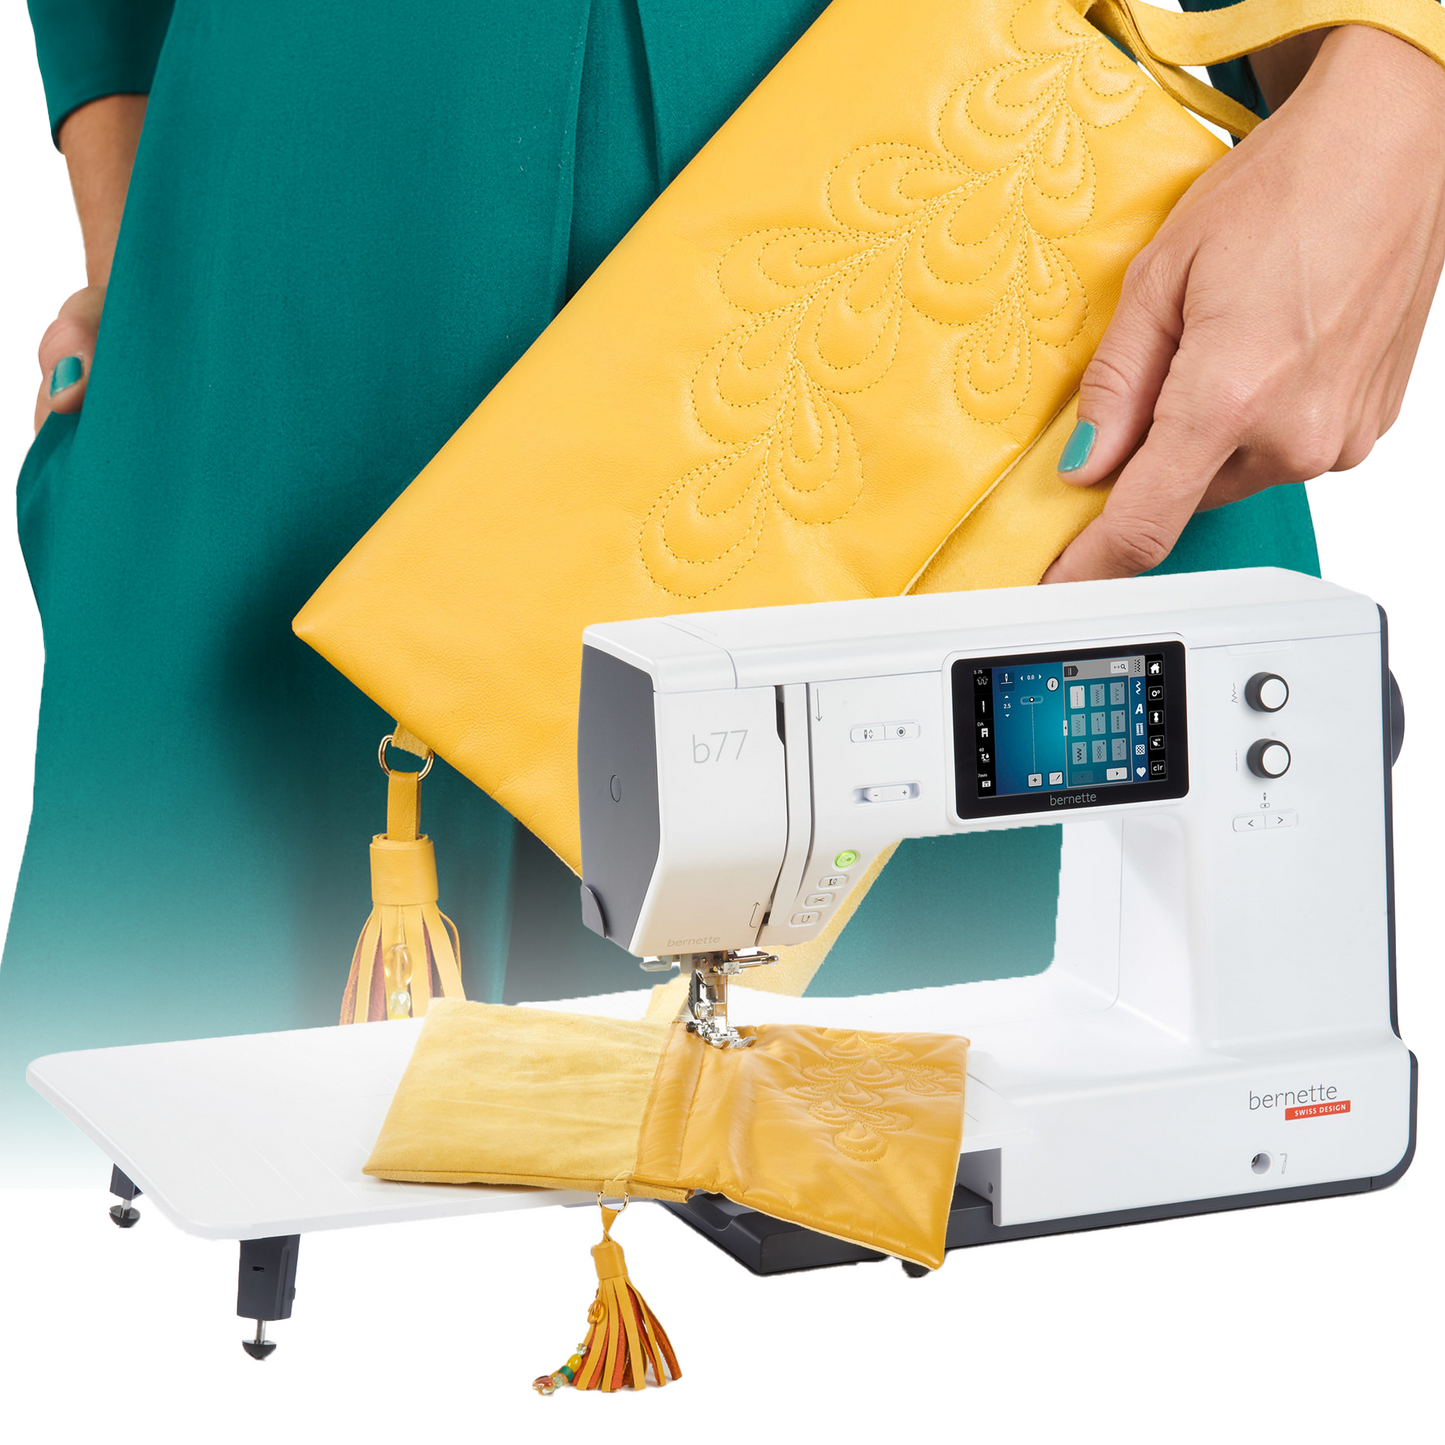 Bernette B77 Affordable Sewing and Quilting Machine - Thread Bundle